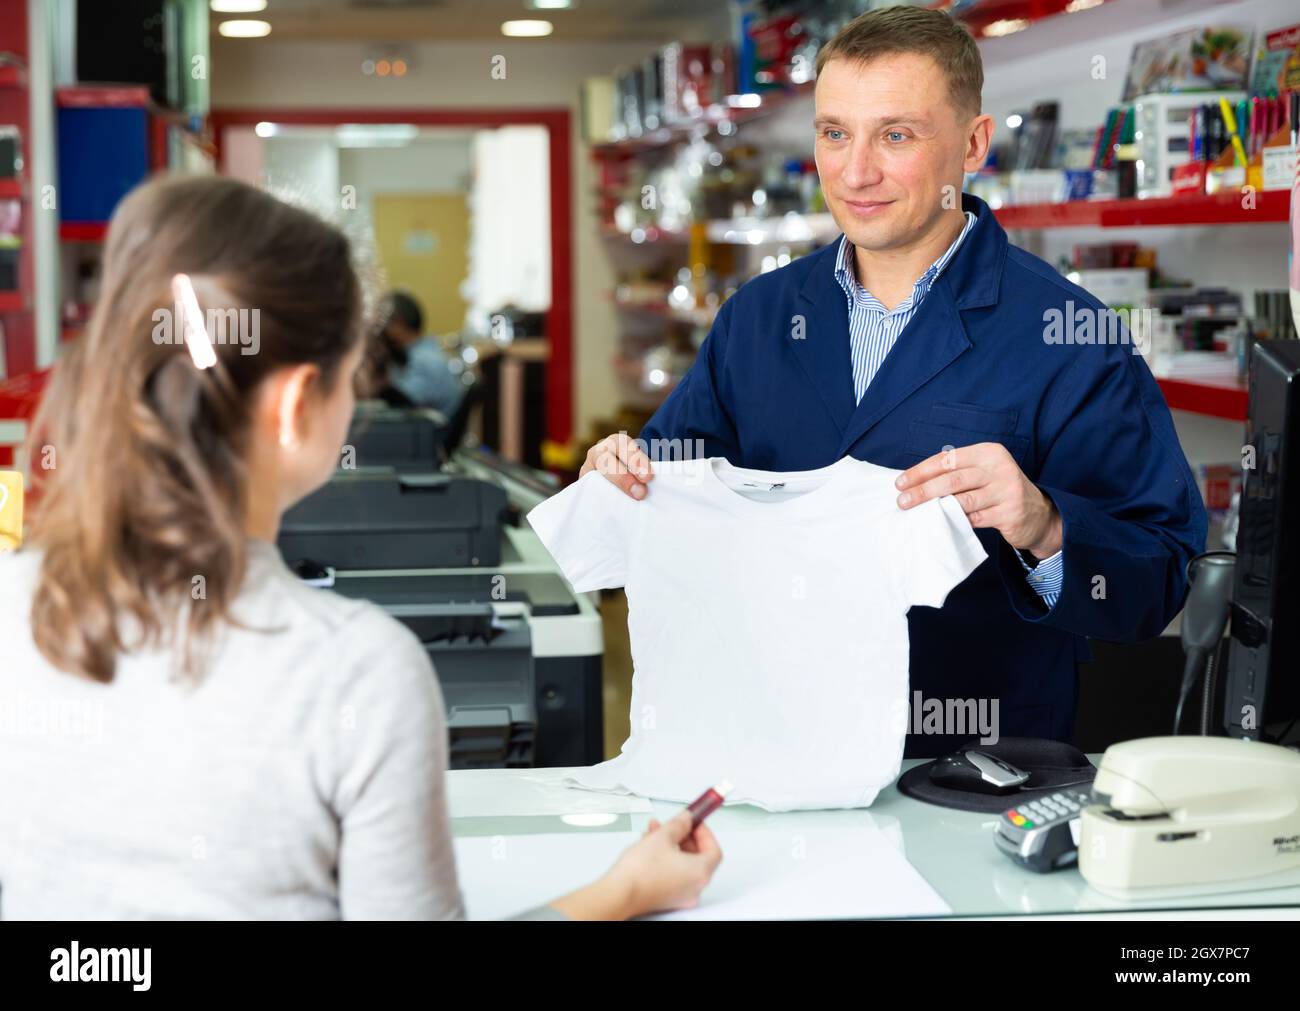 Male administrator offers white t-shirt for drawing picture Stock Photo